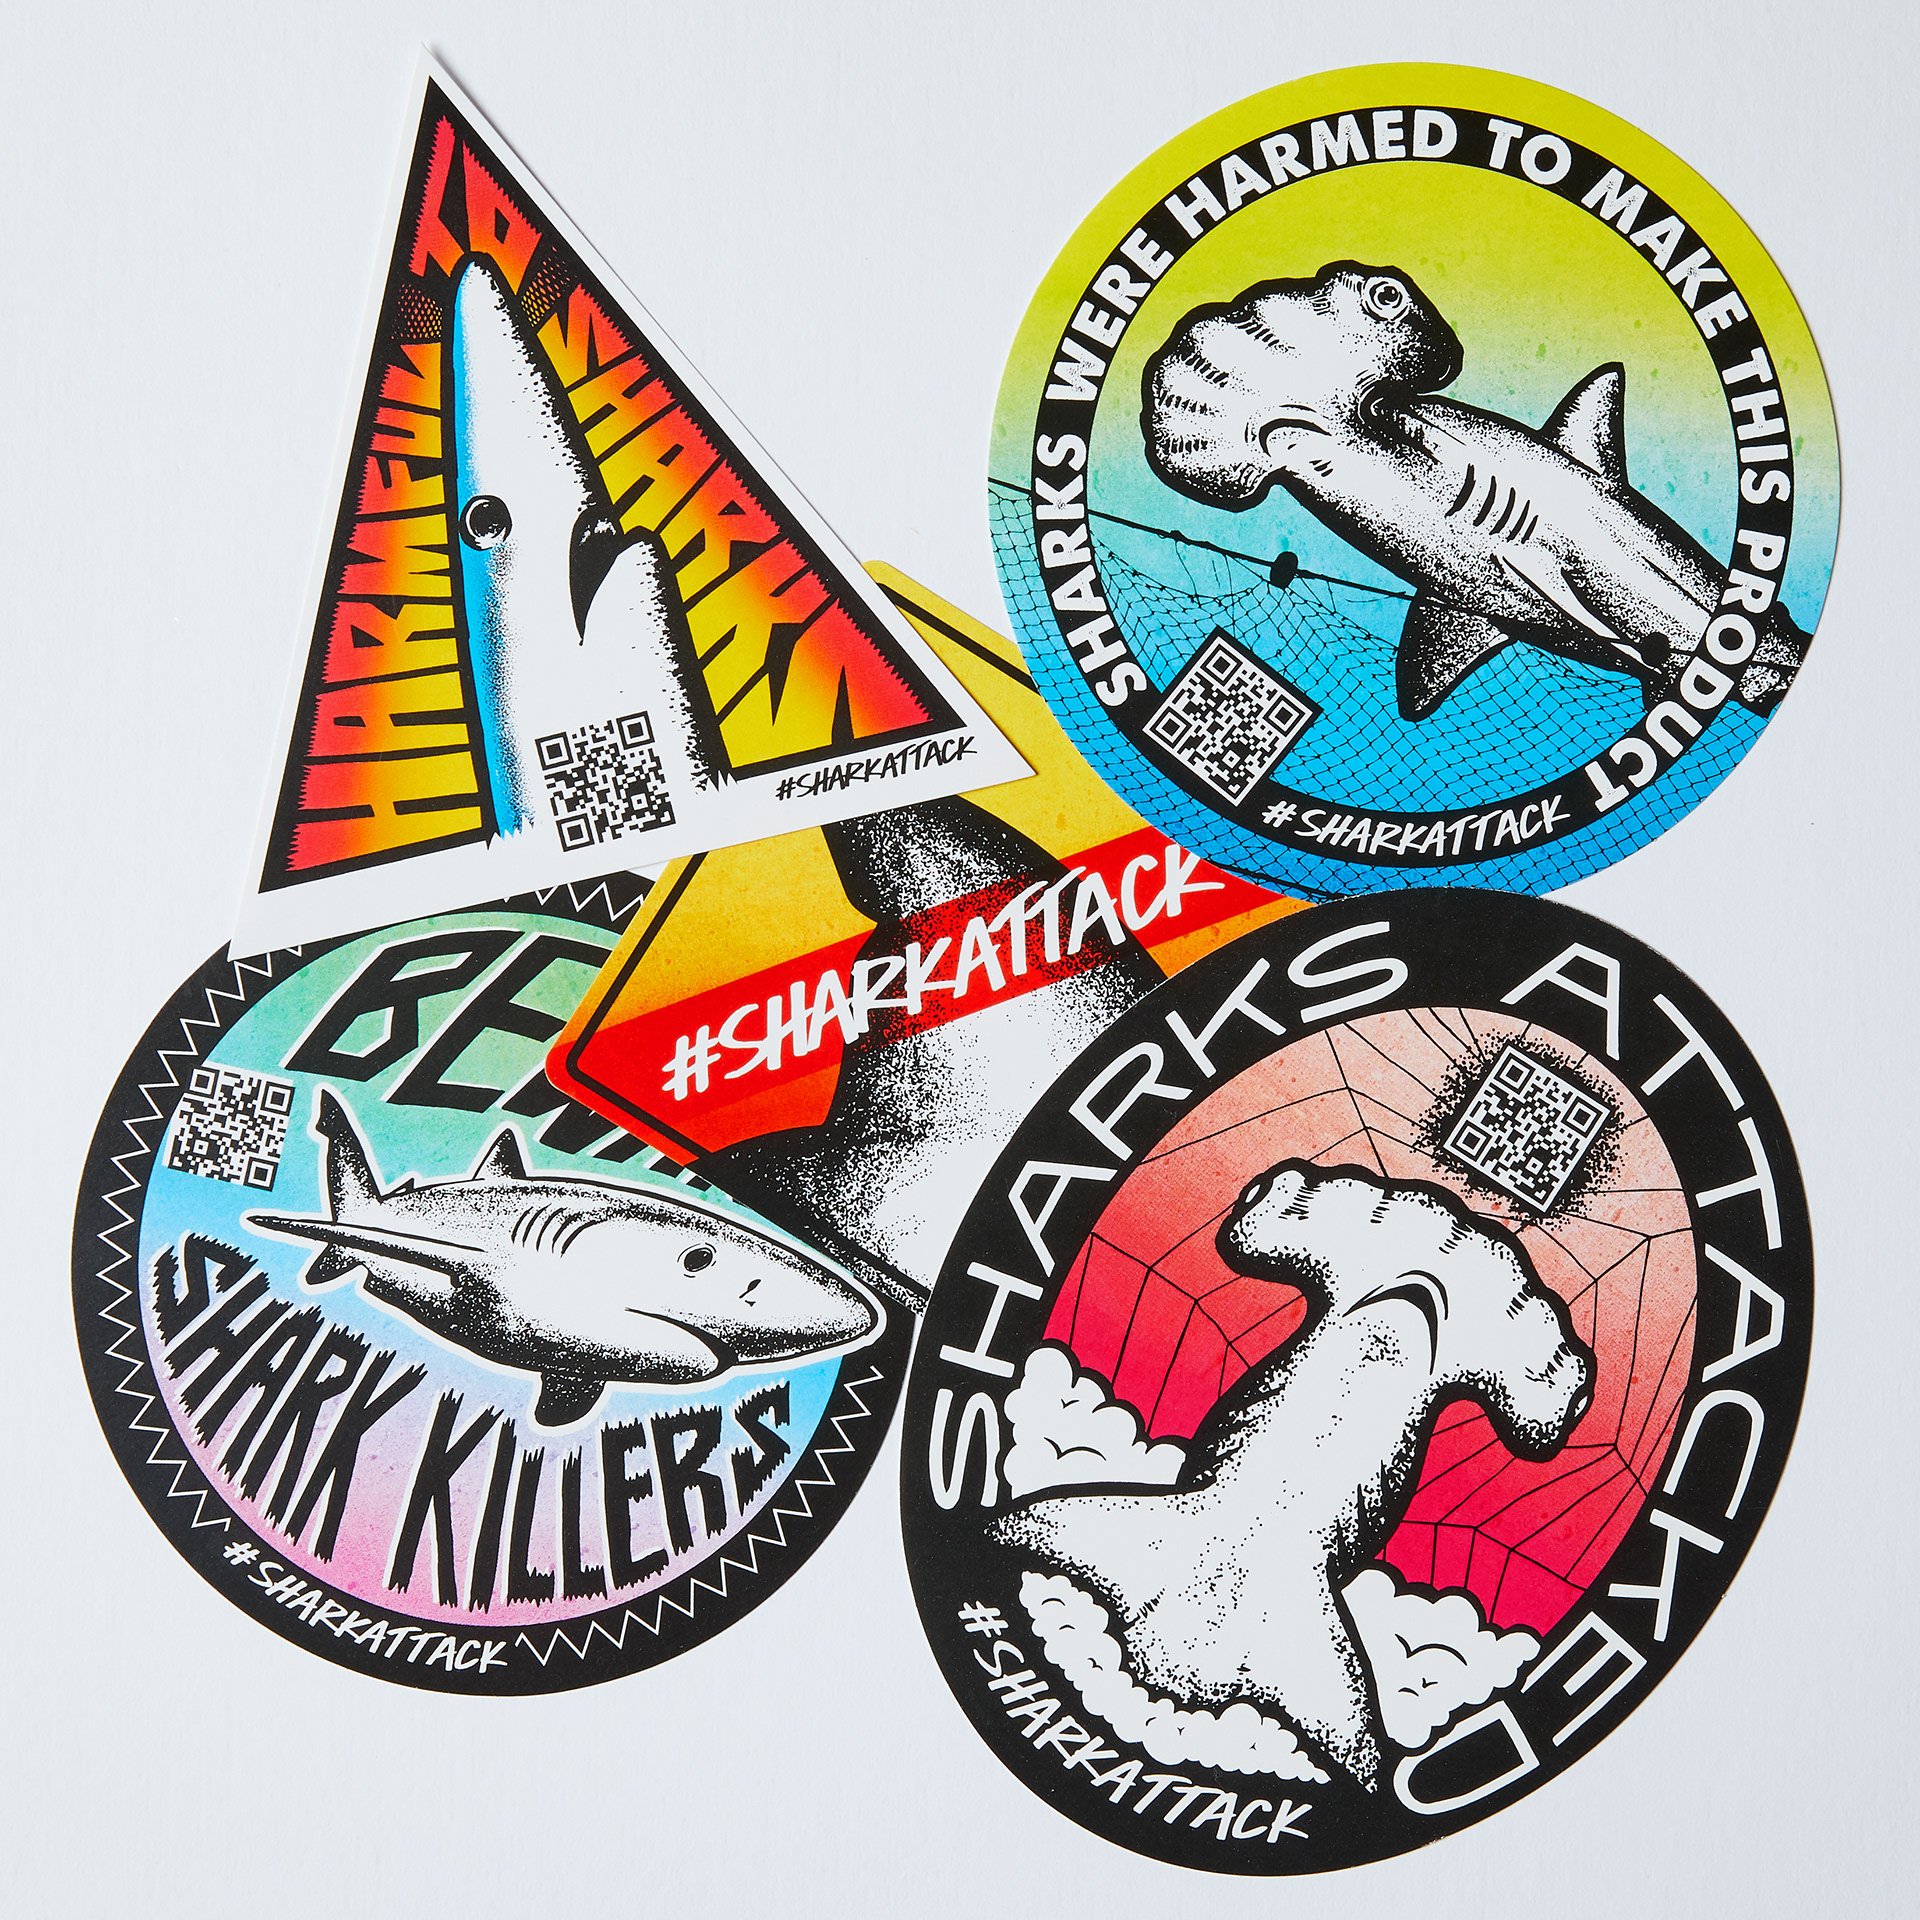 Patch Products Shark Attack! 